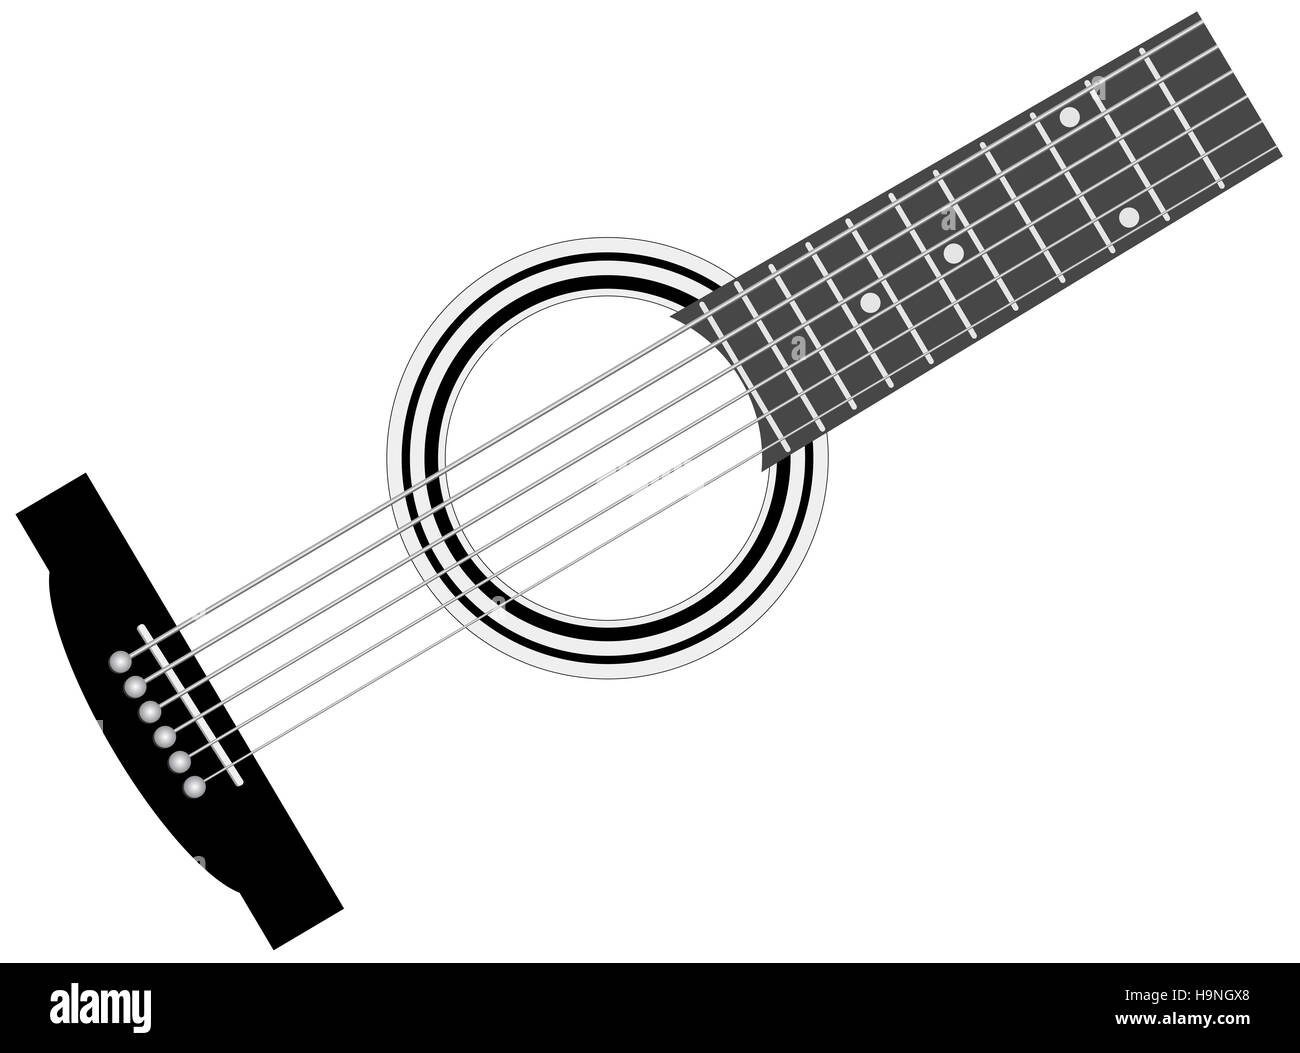 Abstract part of musical instrument - guitar Stock Photo